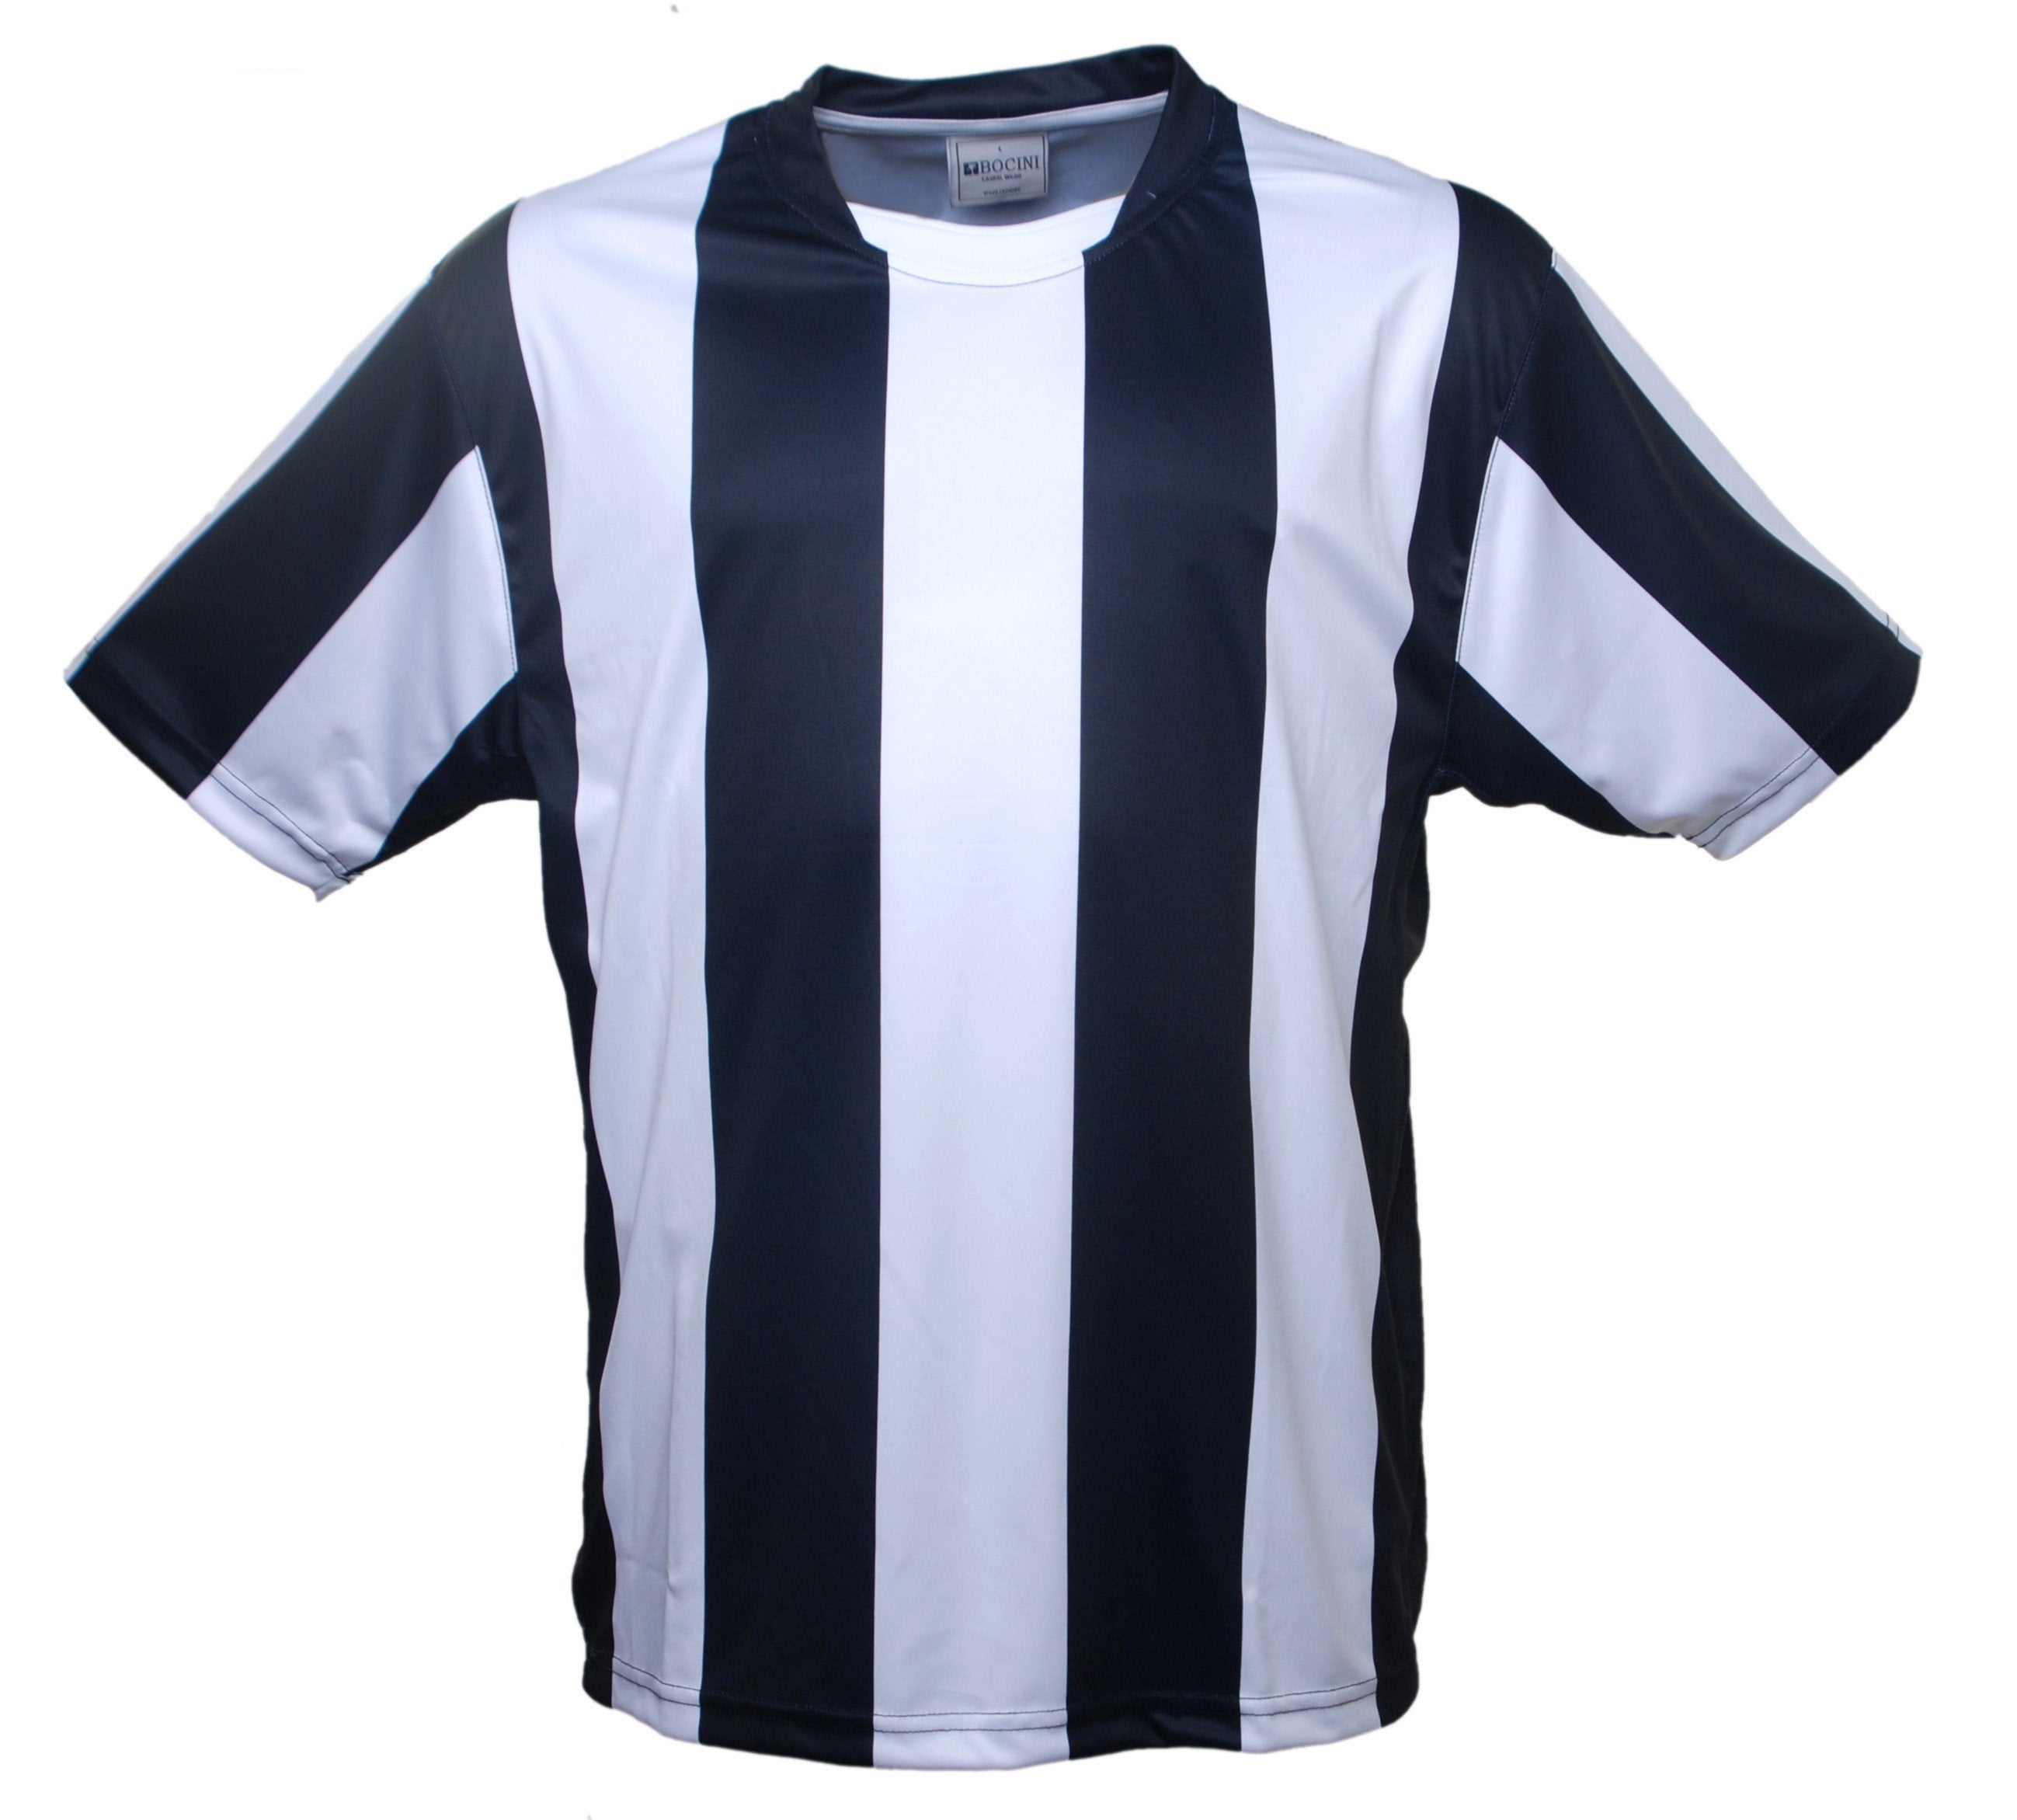 Adults Sublimated Strips Tee